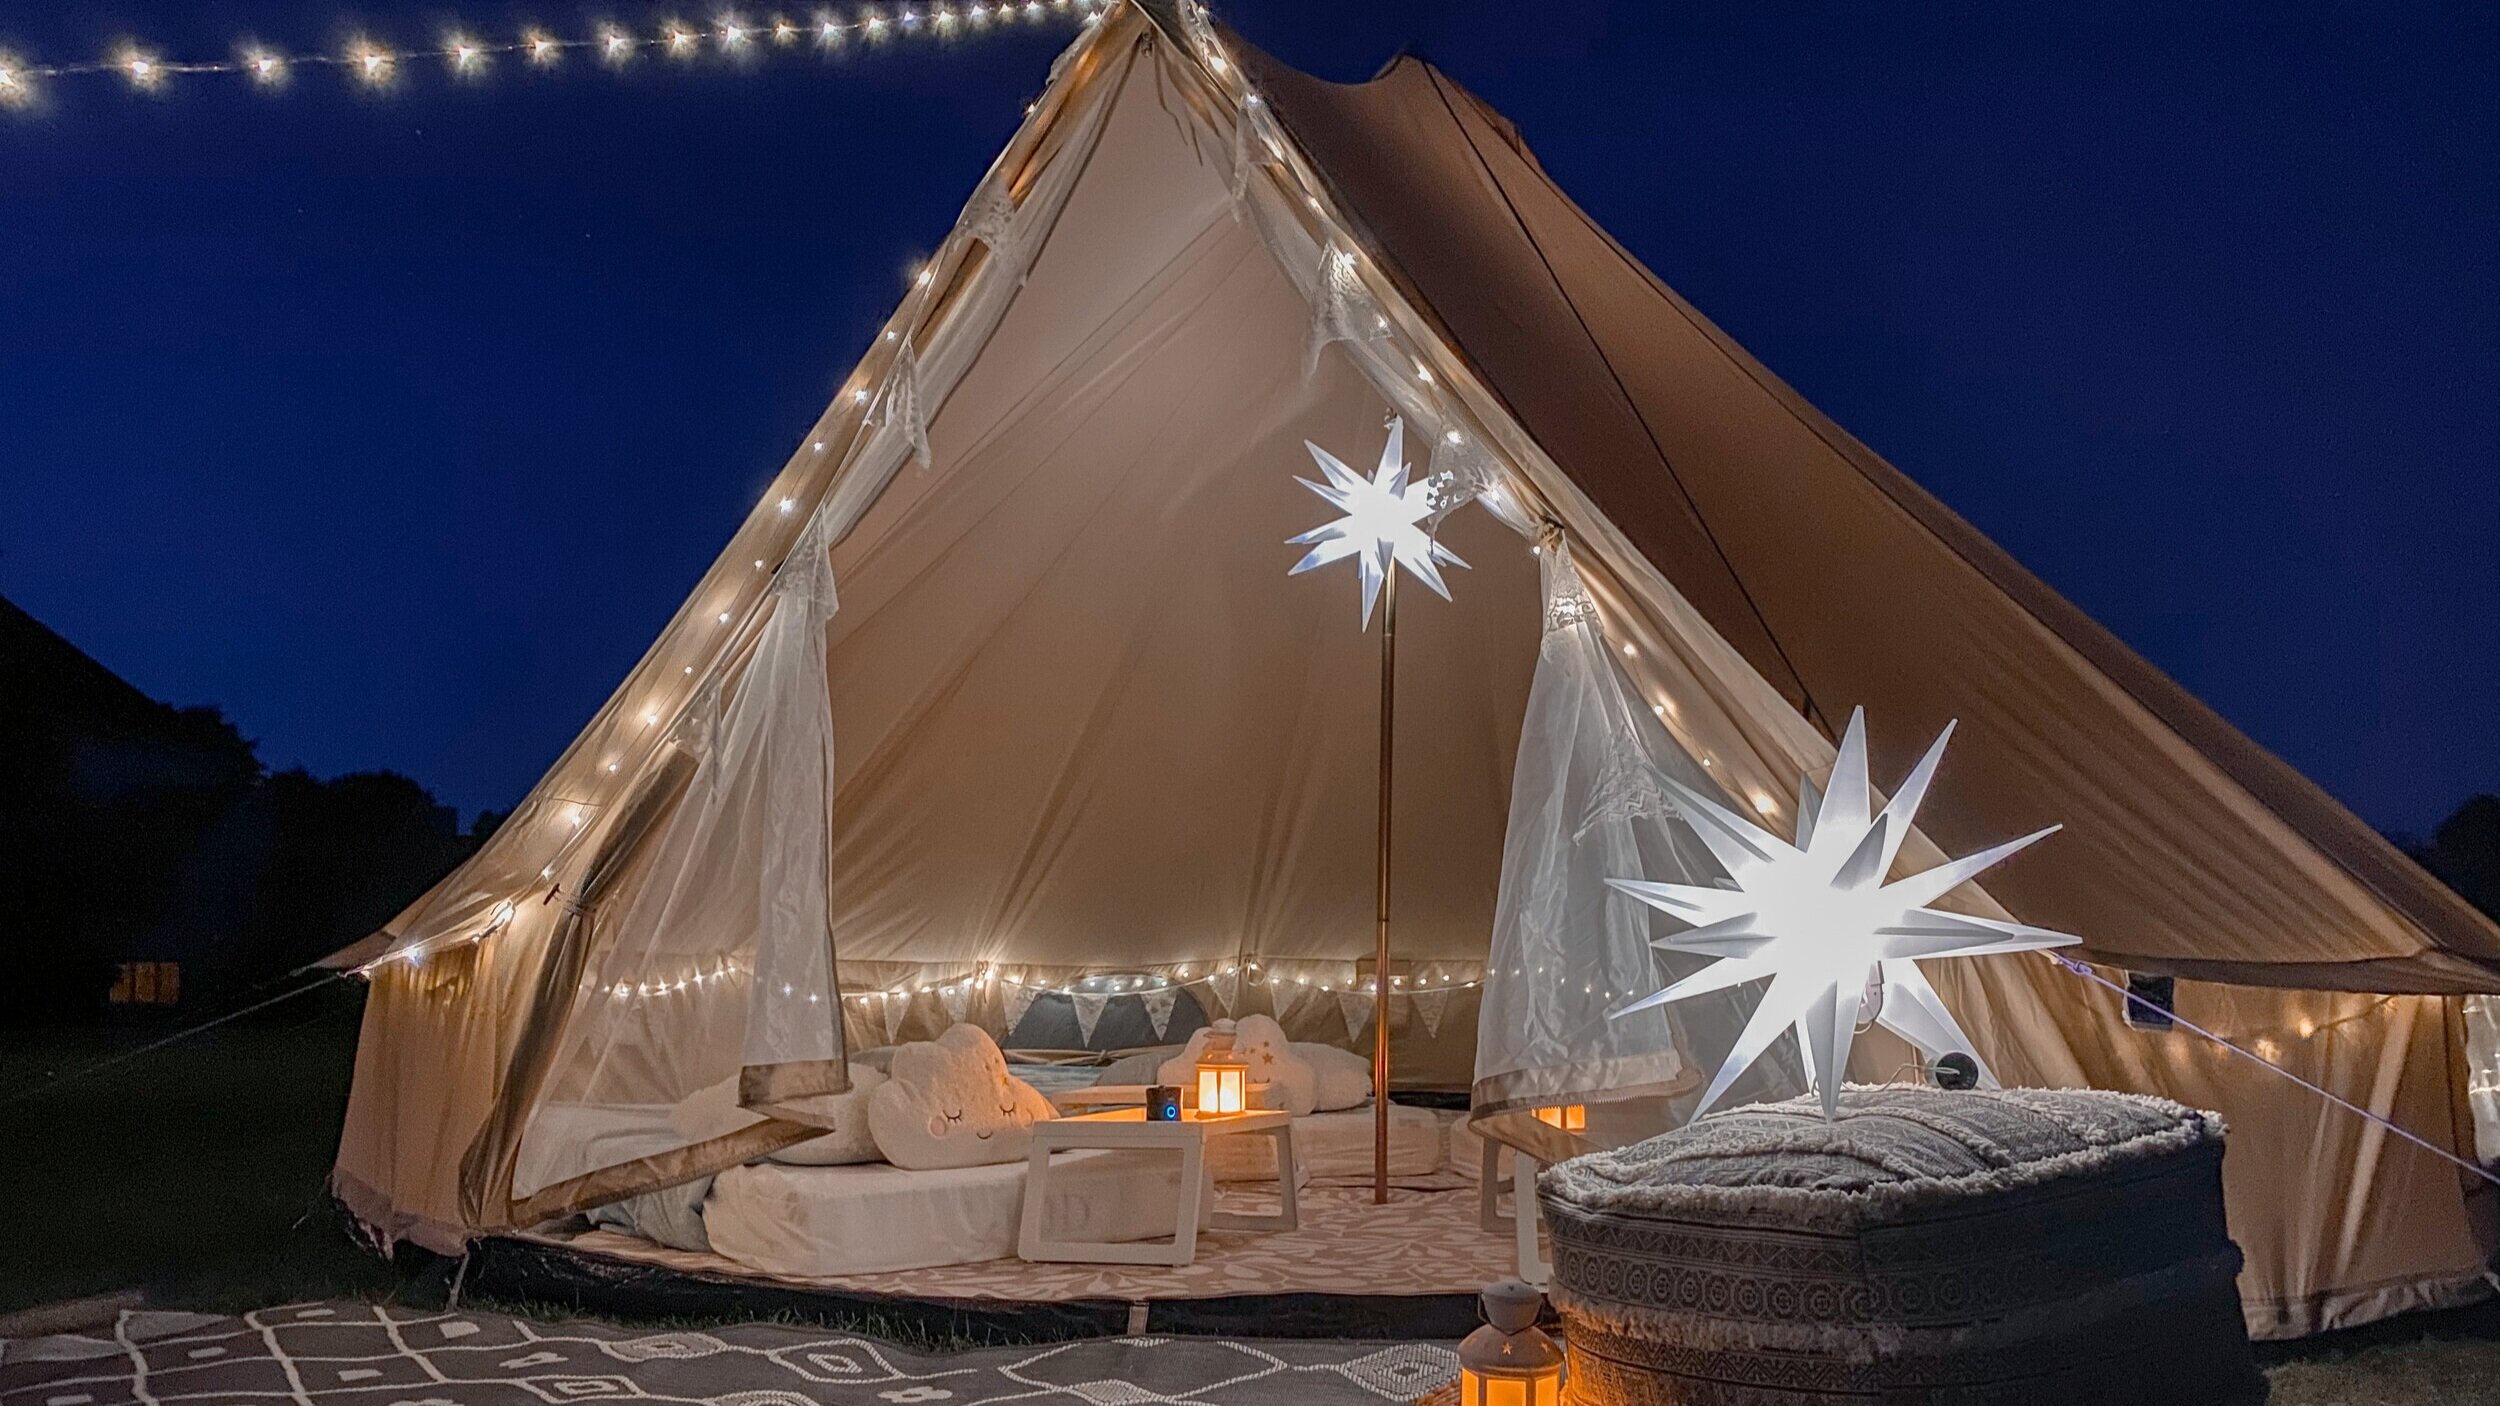 Glamping Tents For Sale - Luxury Canvas Tents - Davis Tent